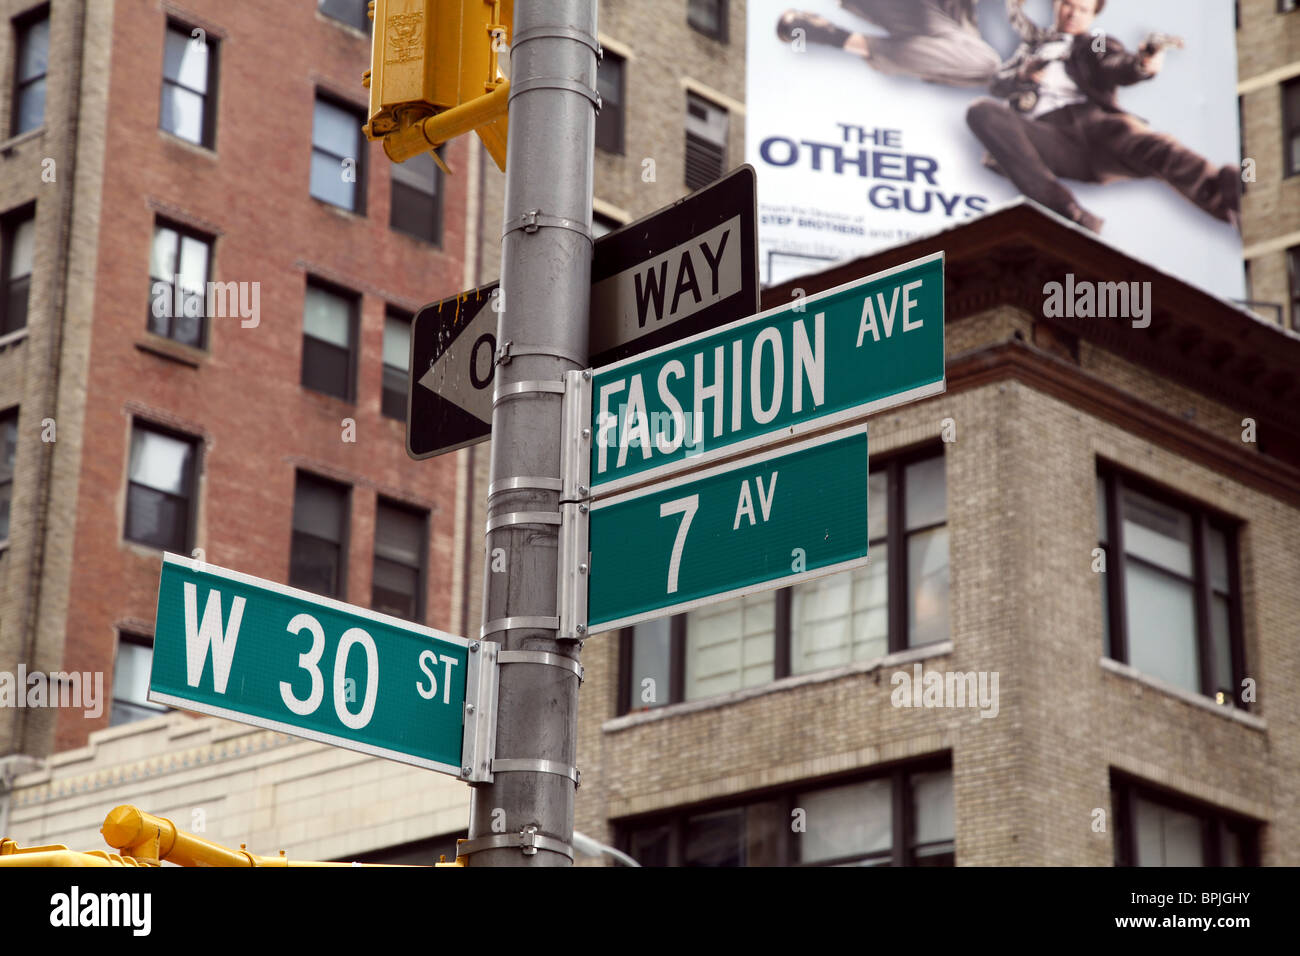 New York City Fashion Avenue Stock Photo - Download Image Now